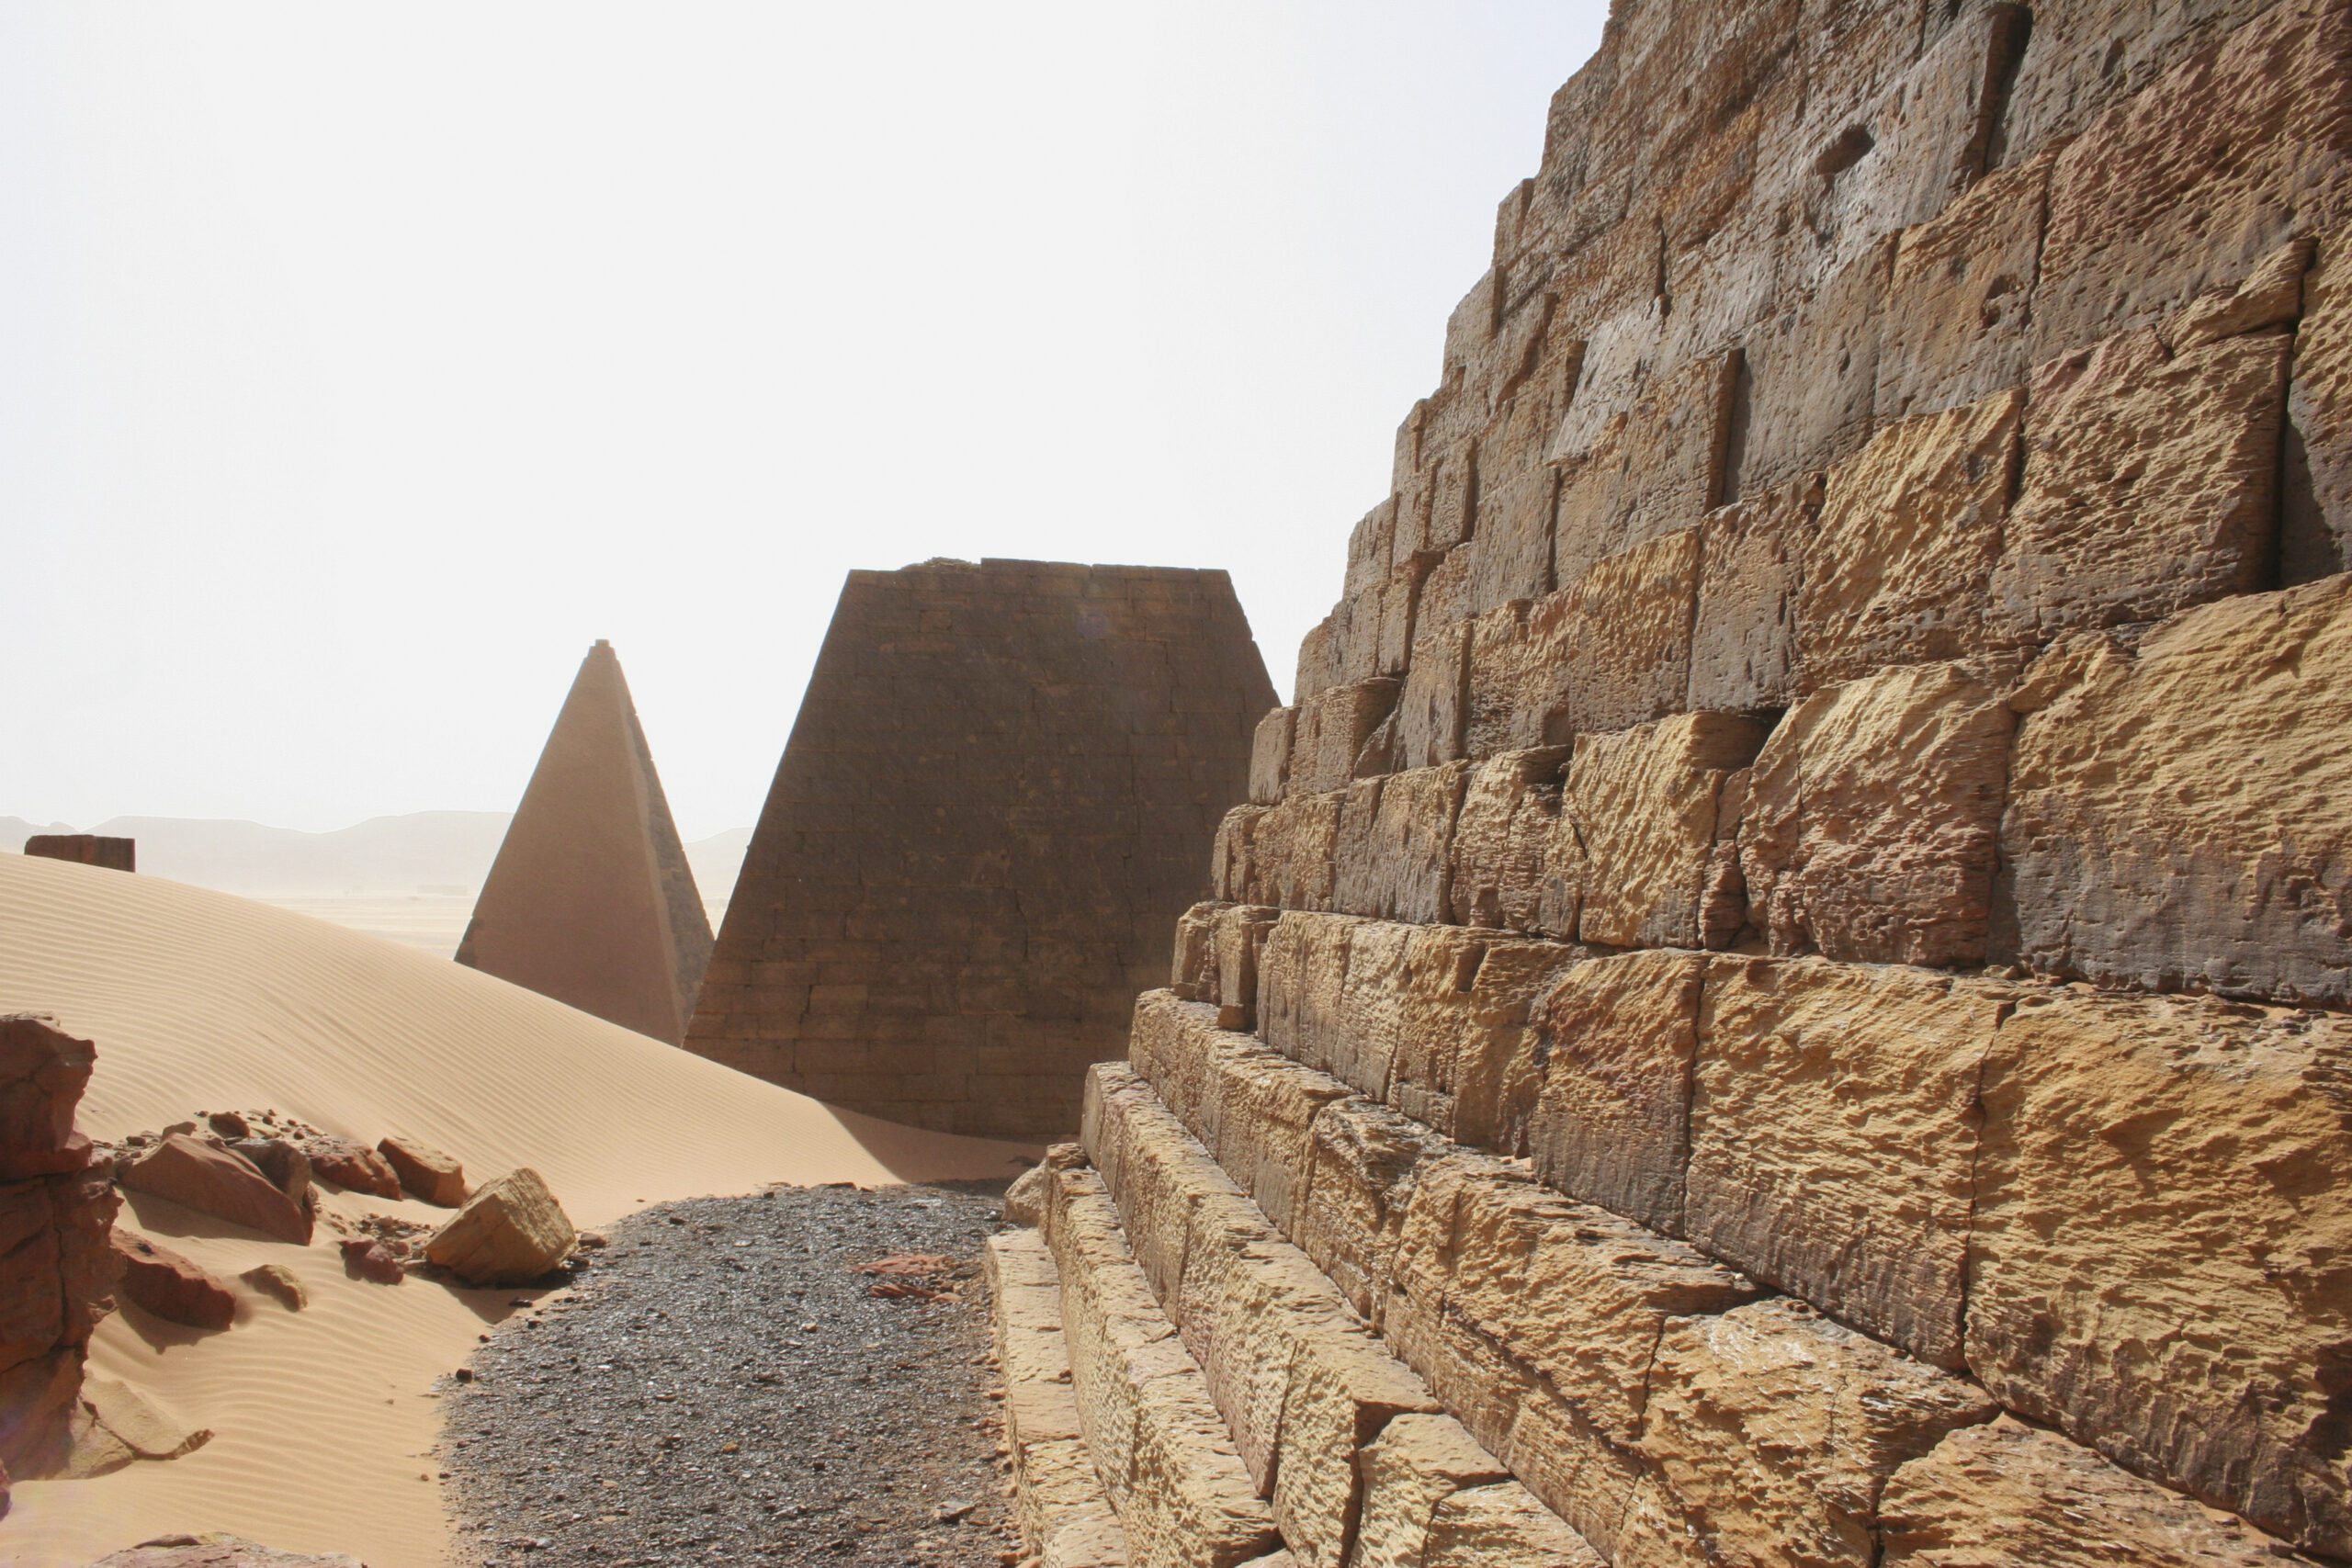 Sudan’s ‘forgotten’ pyramids risk being buried by shifting sand dunes